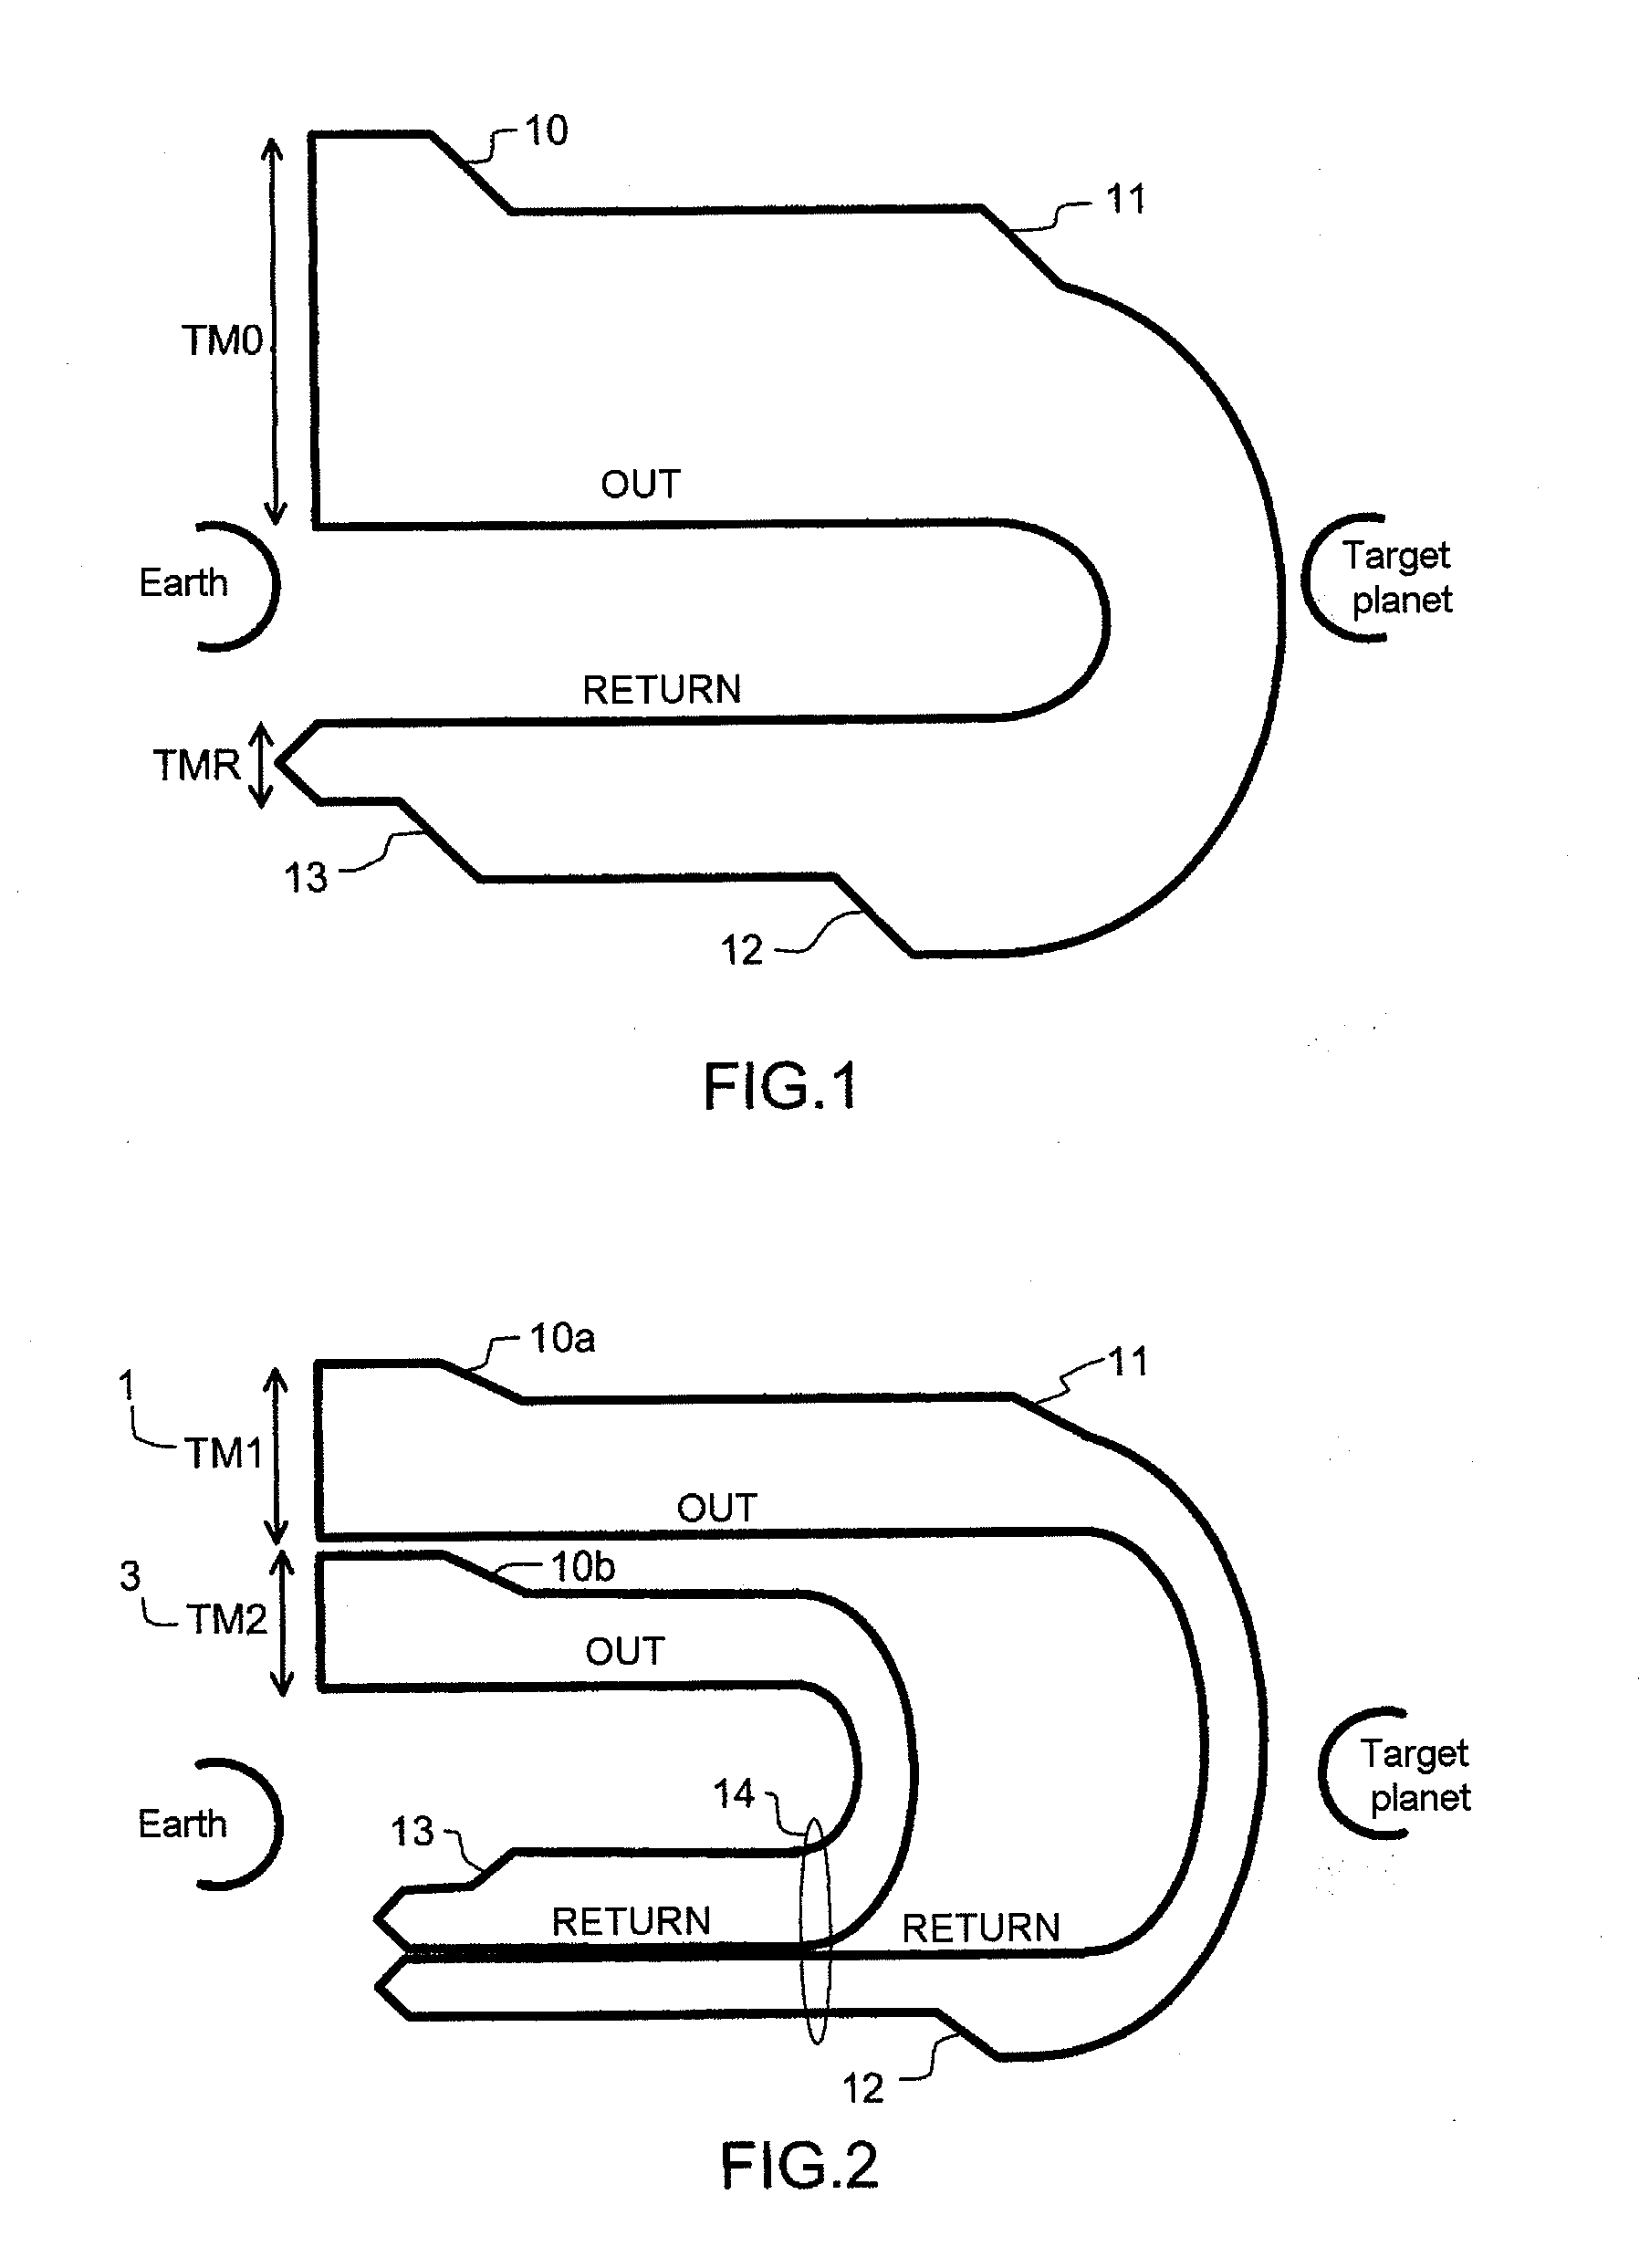 Method for Lightening the Weight of Fuel Stowed Onboard During an Interplanetary Mission